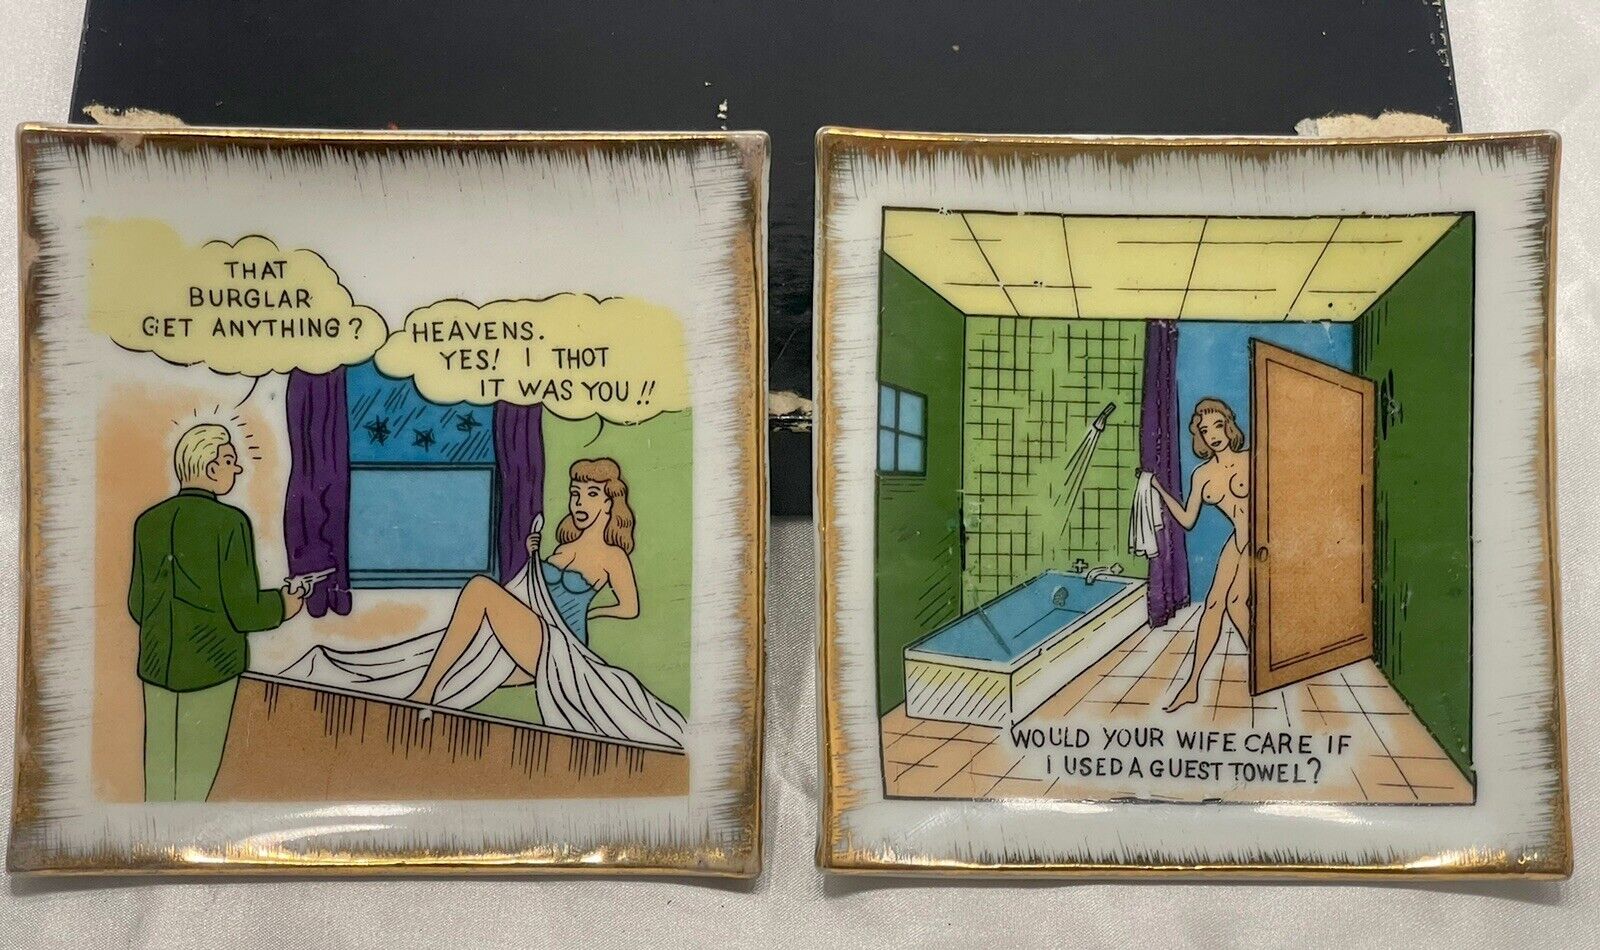 VNTG Bradley Exclusives Japan Ceramic Square Humorous Wall Plates Boxed Set of 2